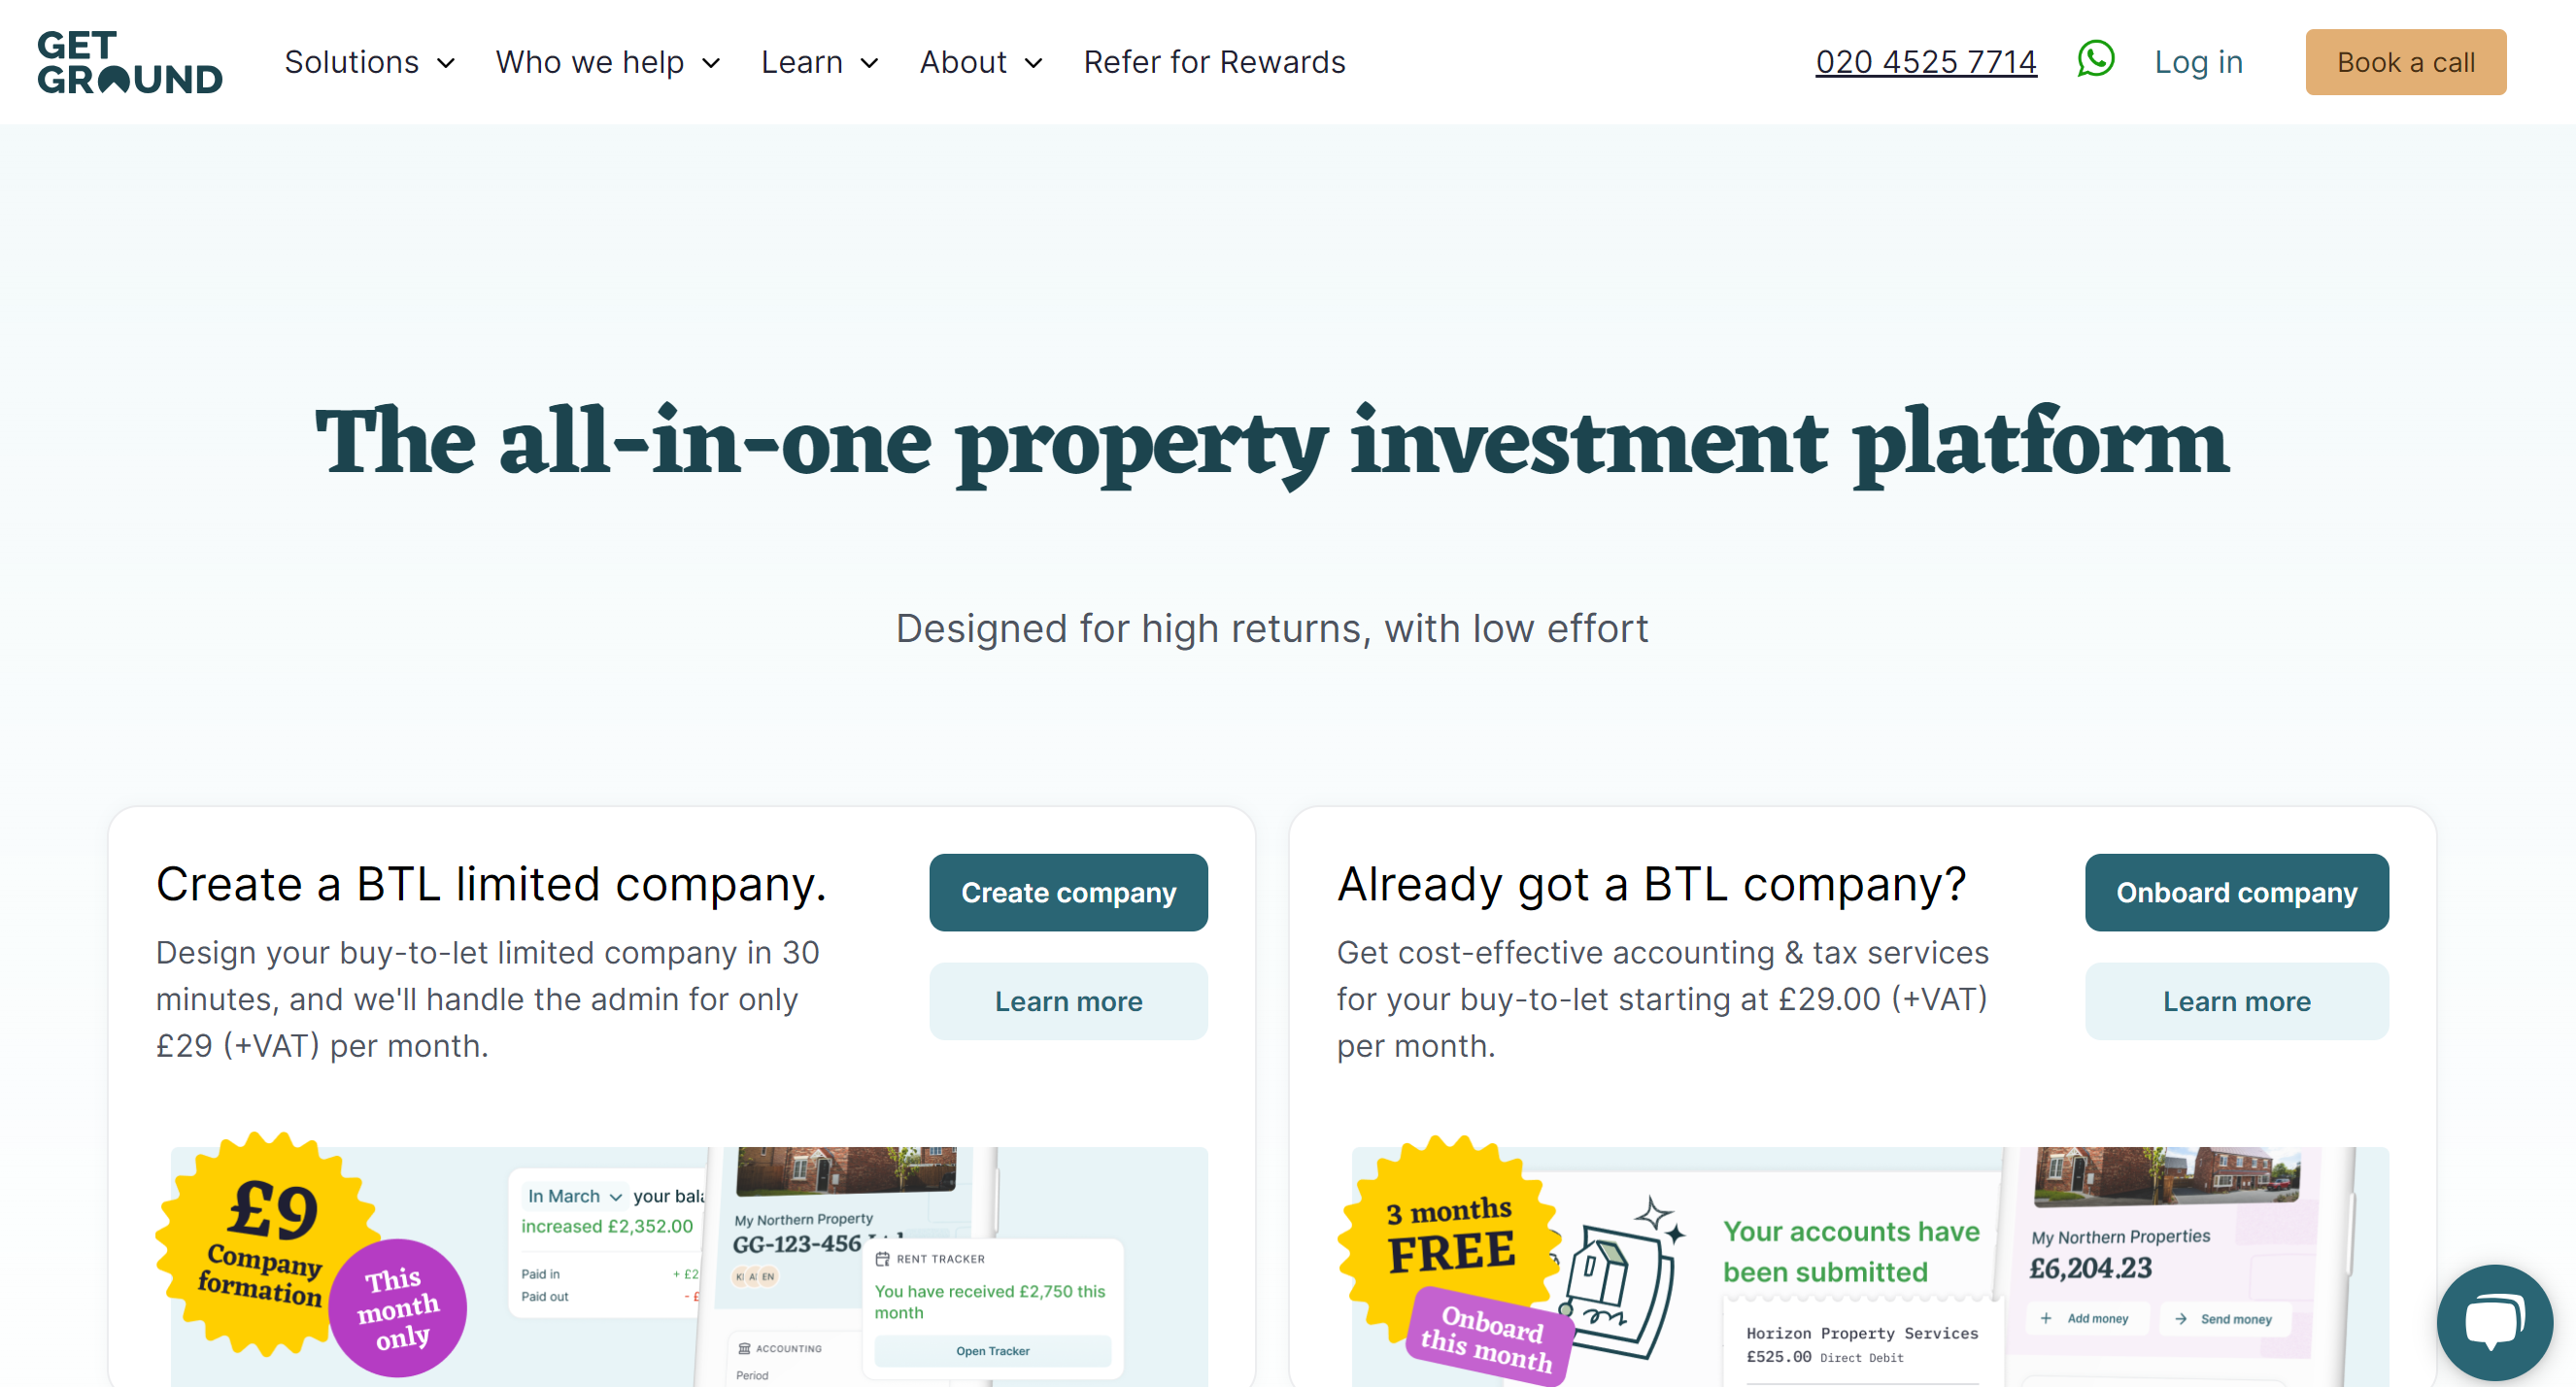 Streamline Your Property Investments with GetGround